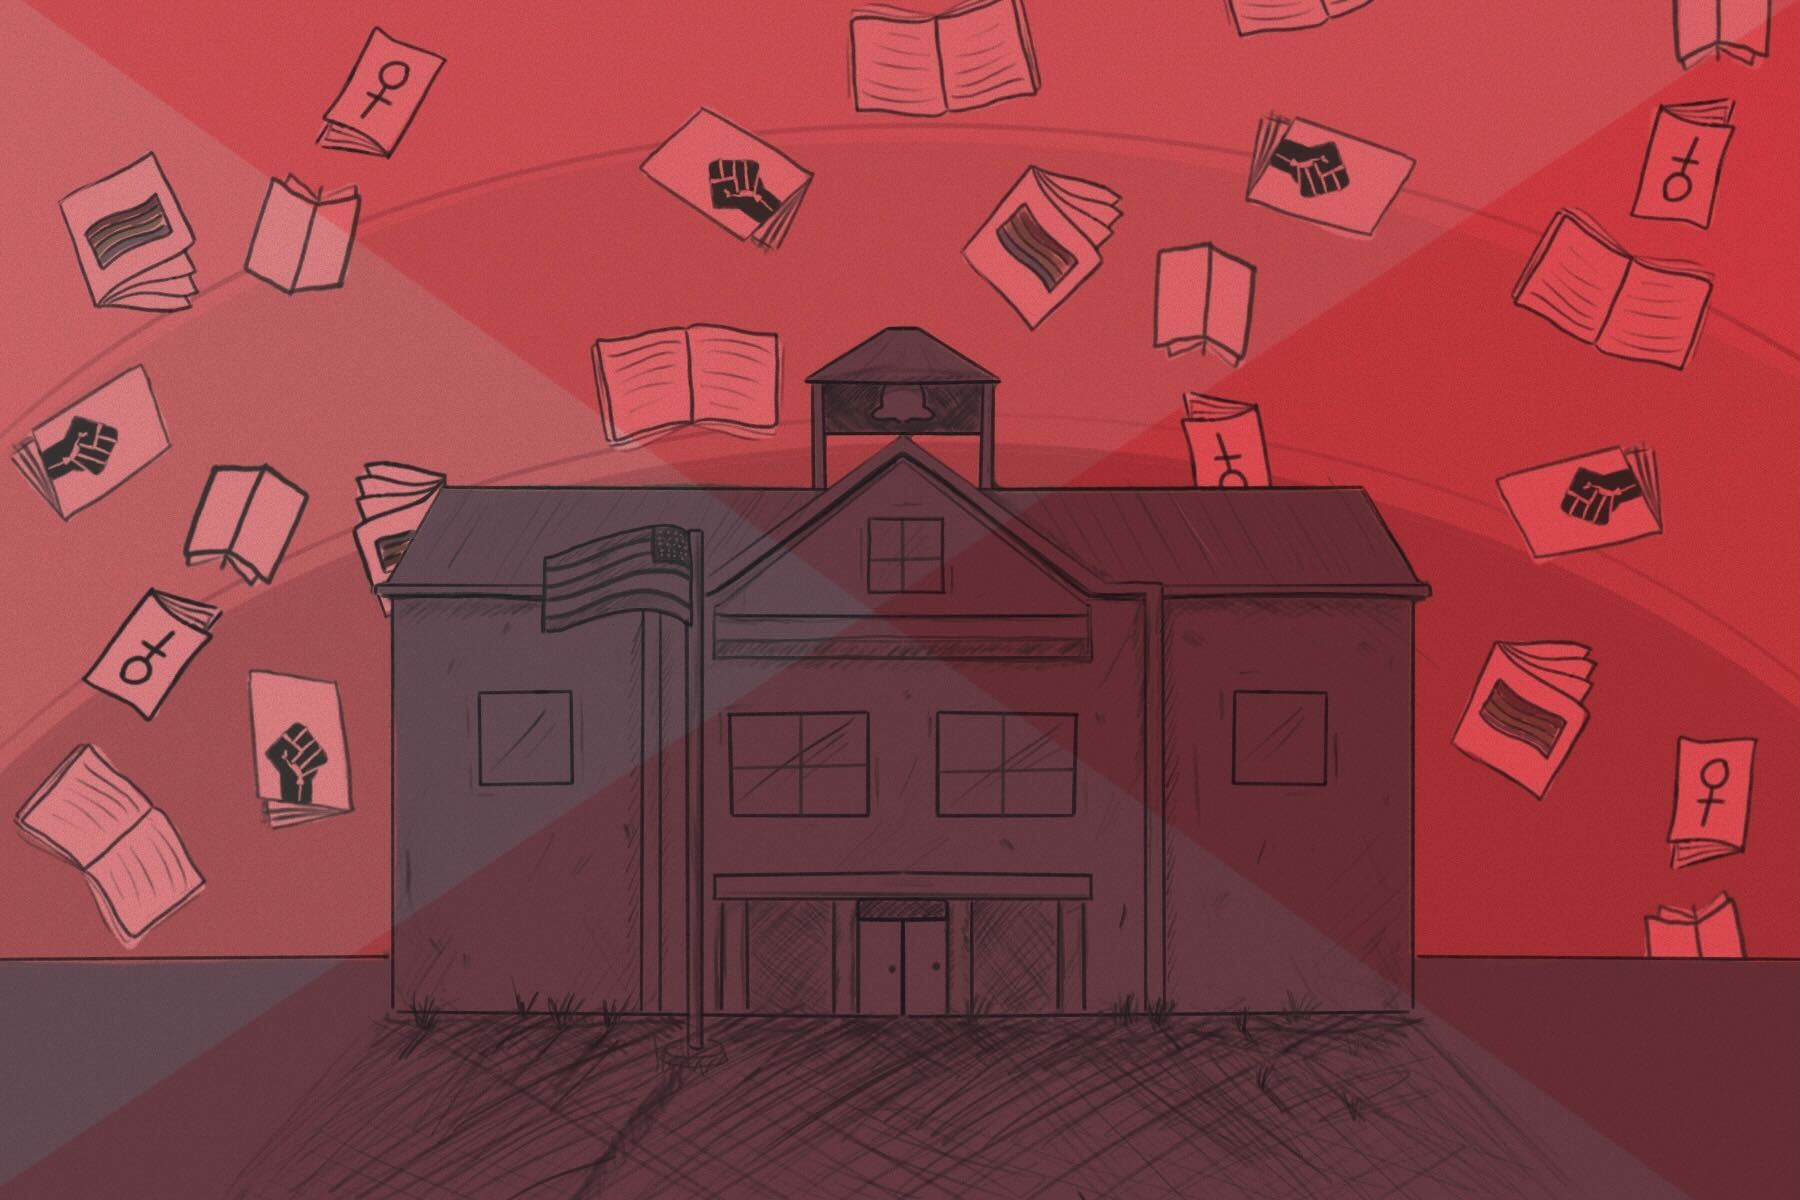 In an illustration about book bans, a schoolhouse is surrounded by books with controversial symbols